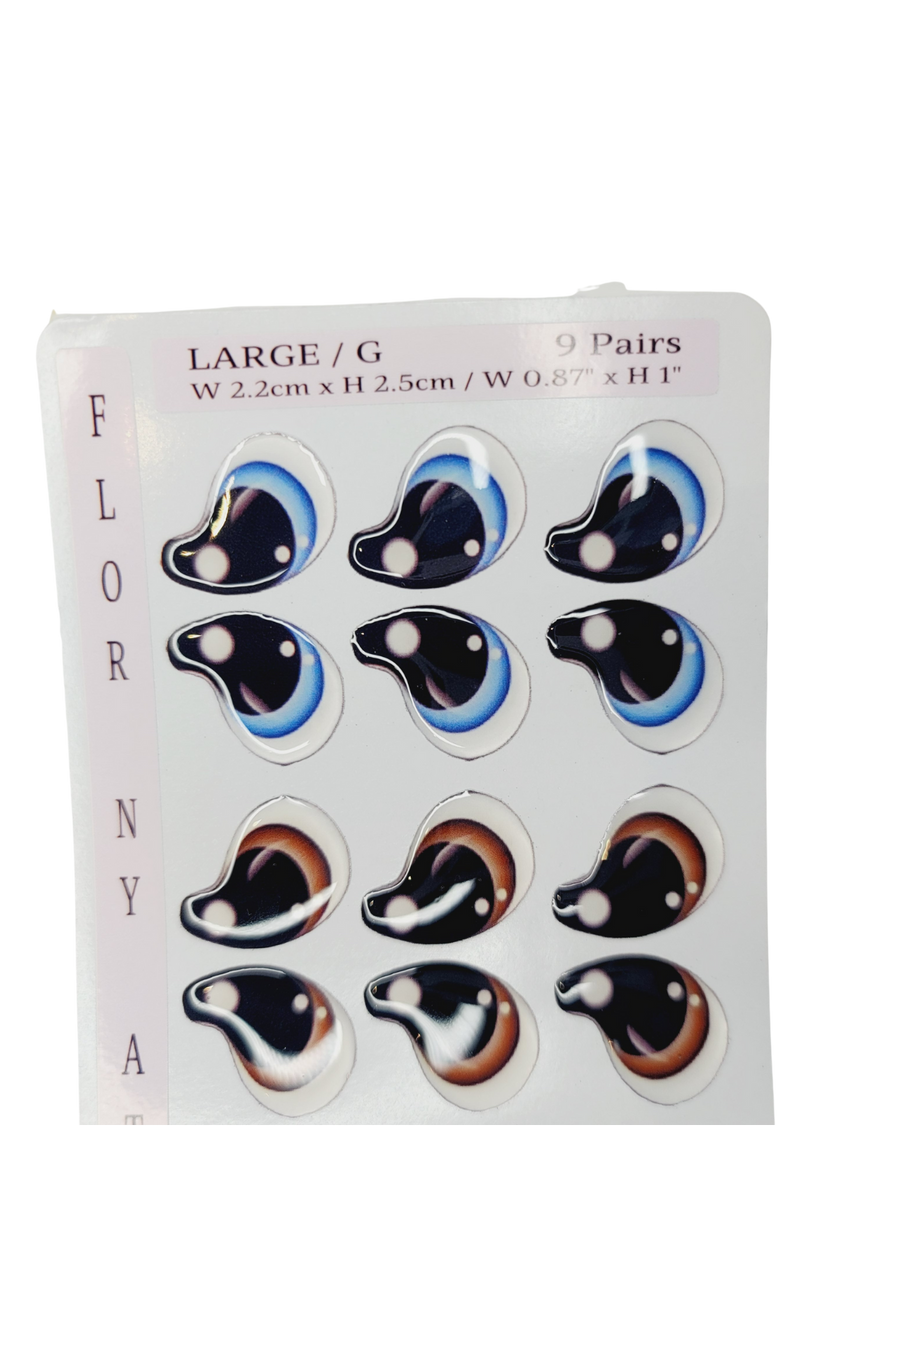 Adhesive Resin Eyes FNY 1003 - Large/G - 9 Pairs - W/H 2.2cmx2.5cm (0.87"x1") - for use with Cold Porcelain Air Dry Clay, Polymer Clay, EVA, Felt, Fabric, Plaster, Paper, Ceramic and more